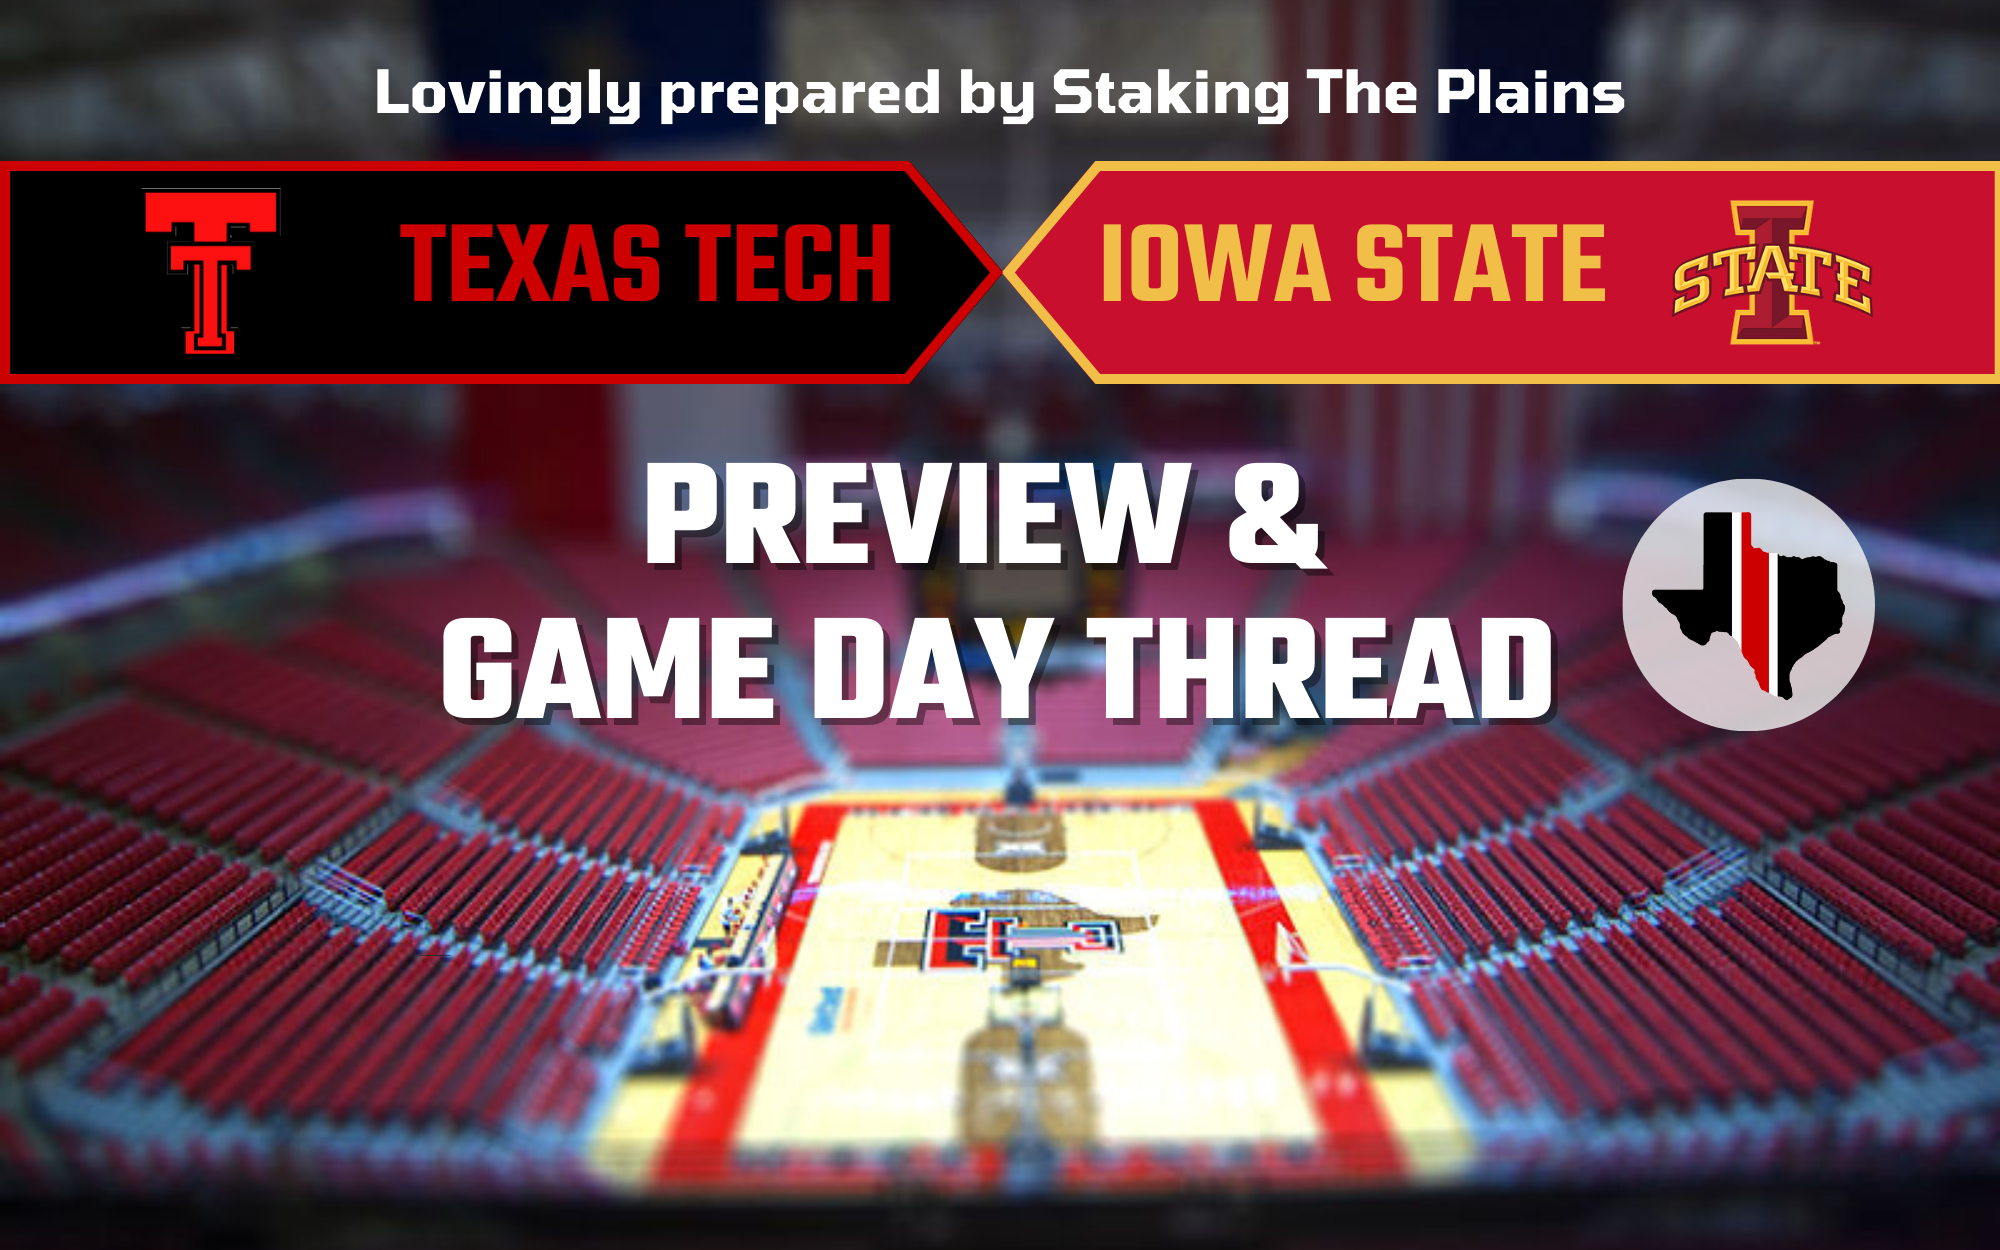 Preview & Game Day Thread: Texas Tech vs. Iowa State